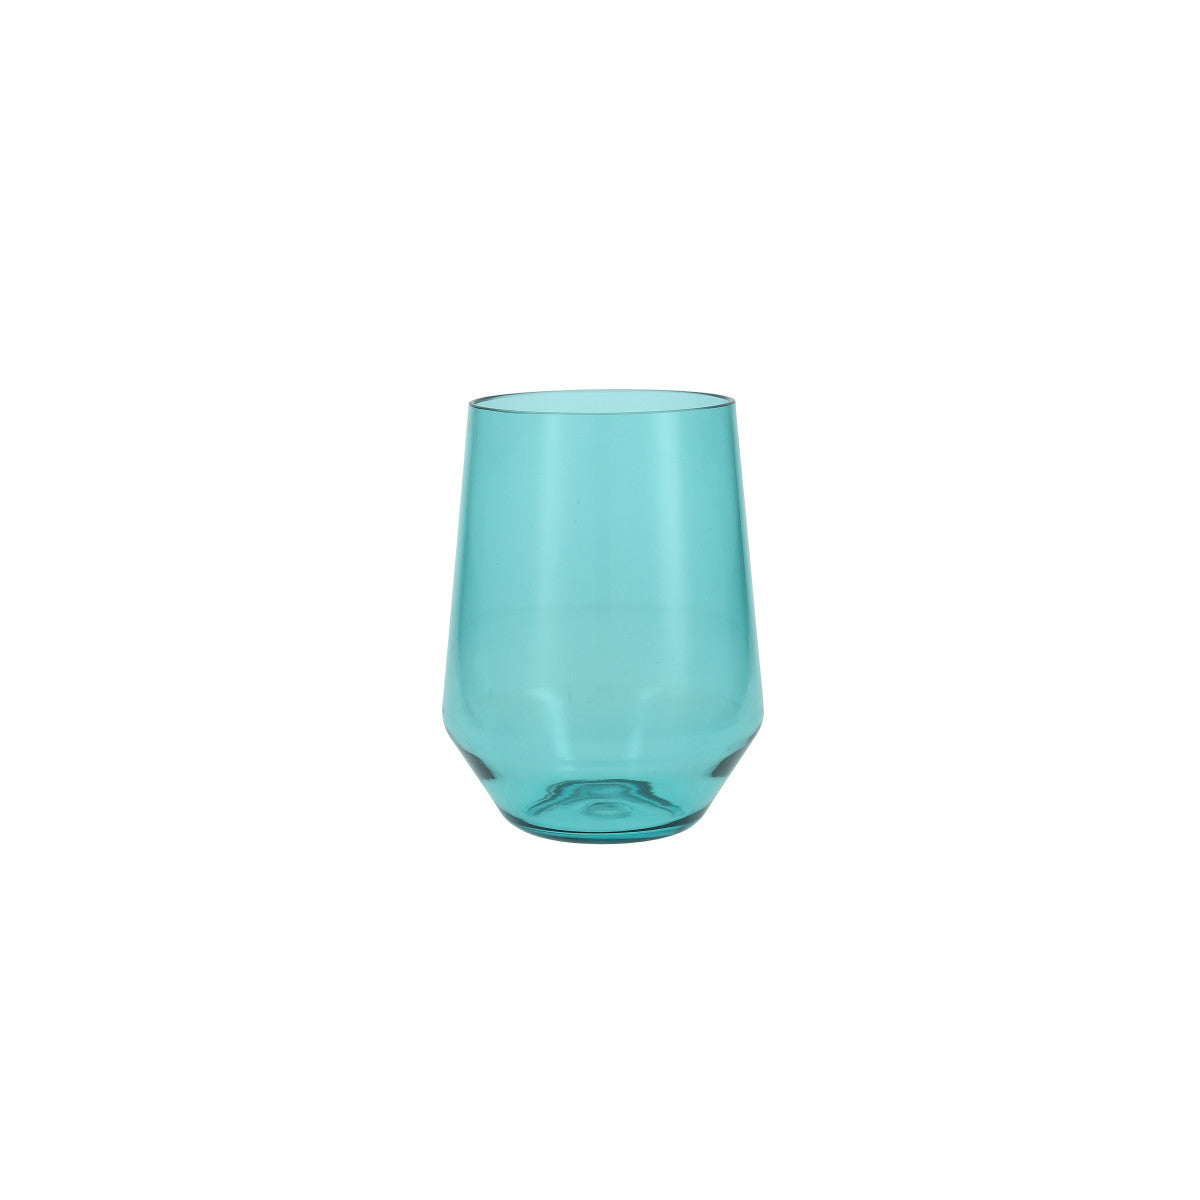 blue stemless wine glass on white background.